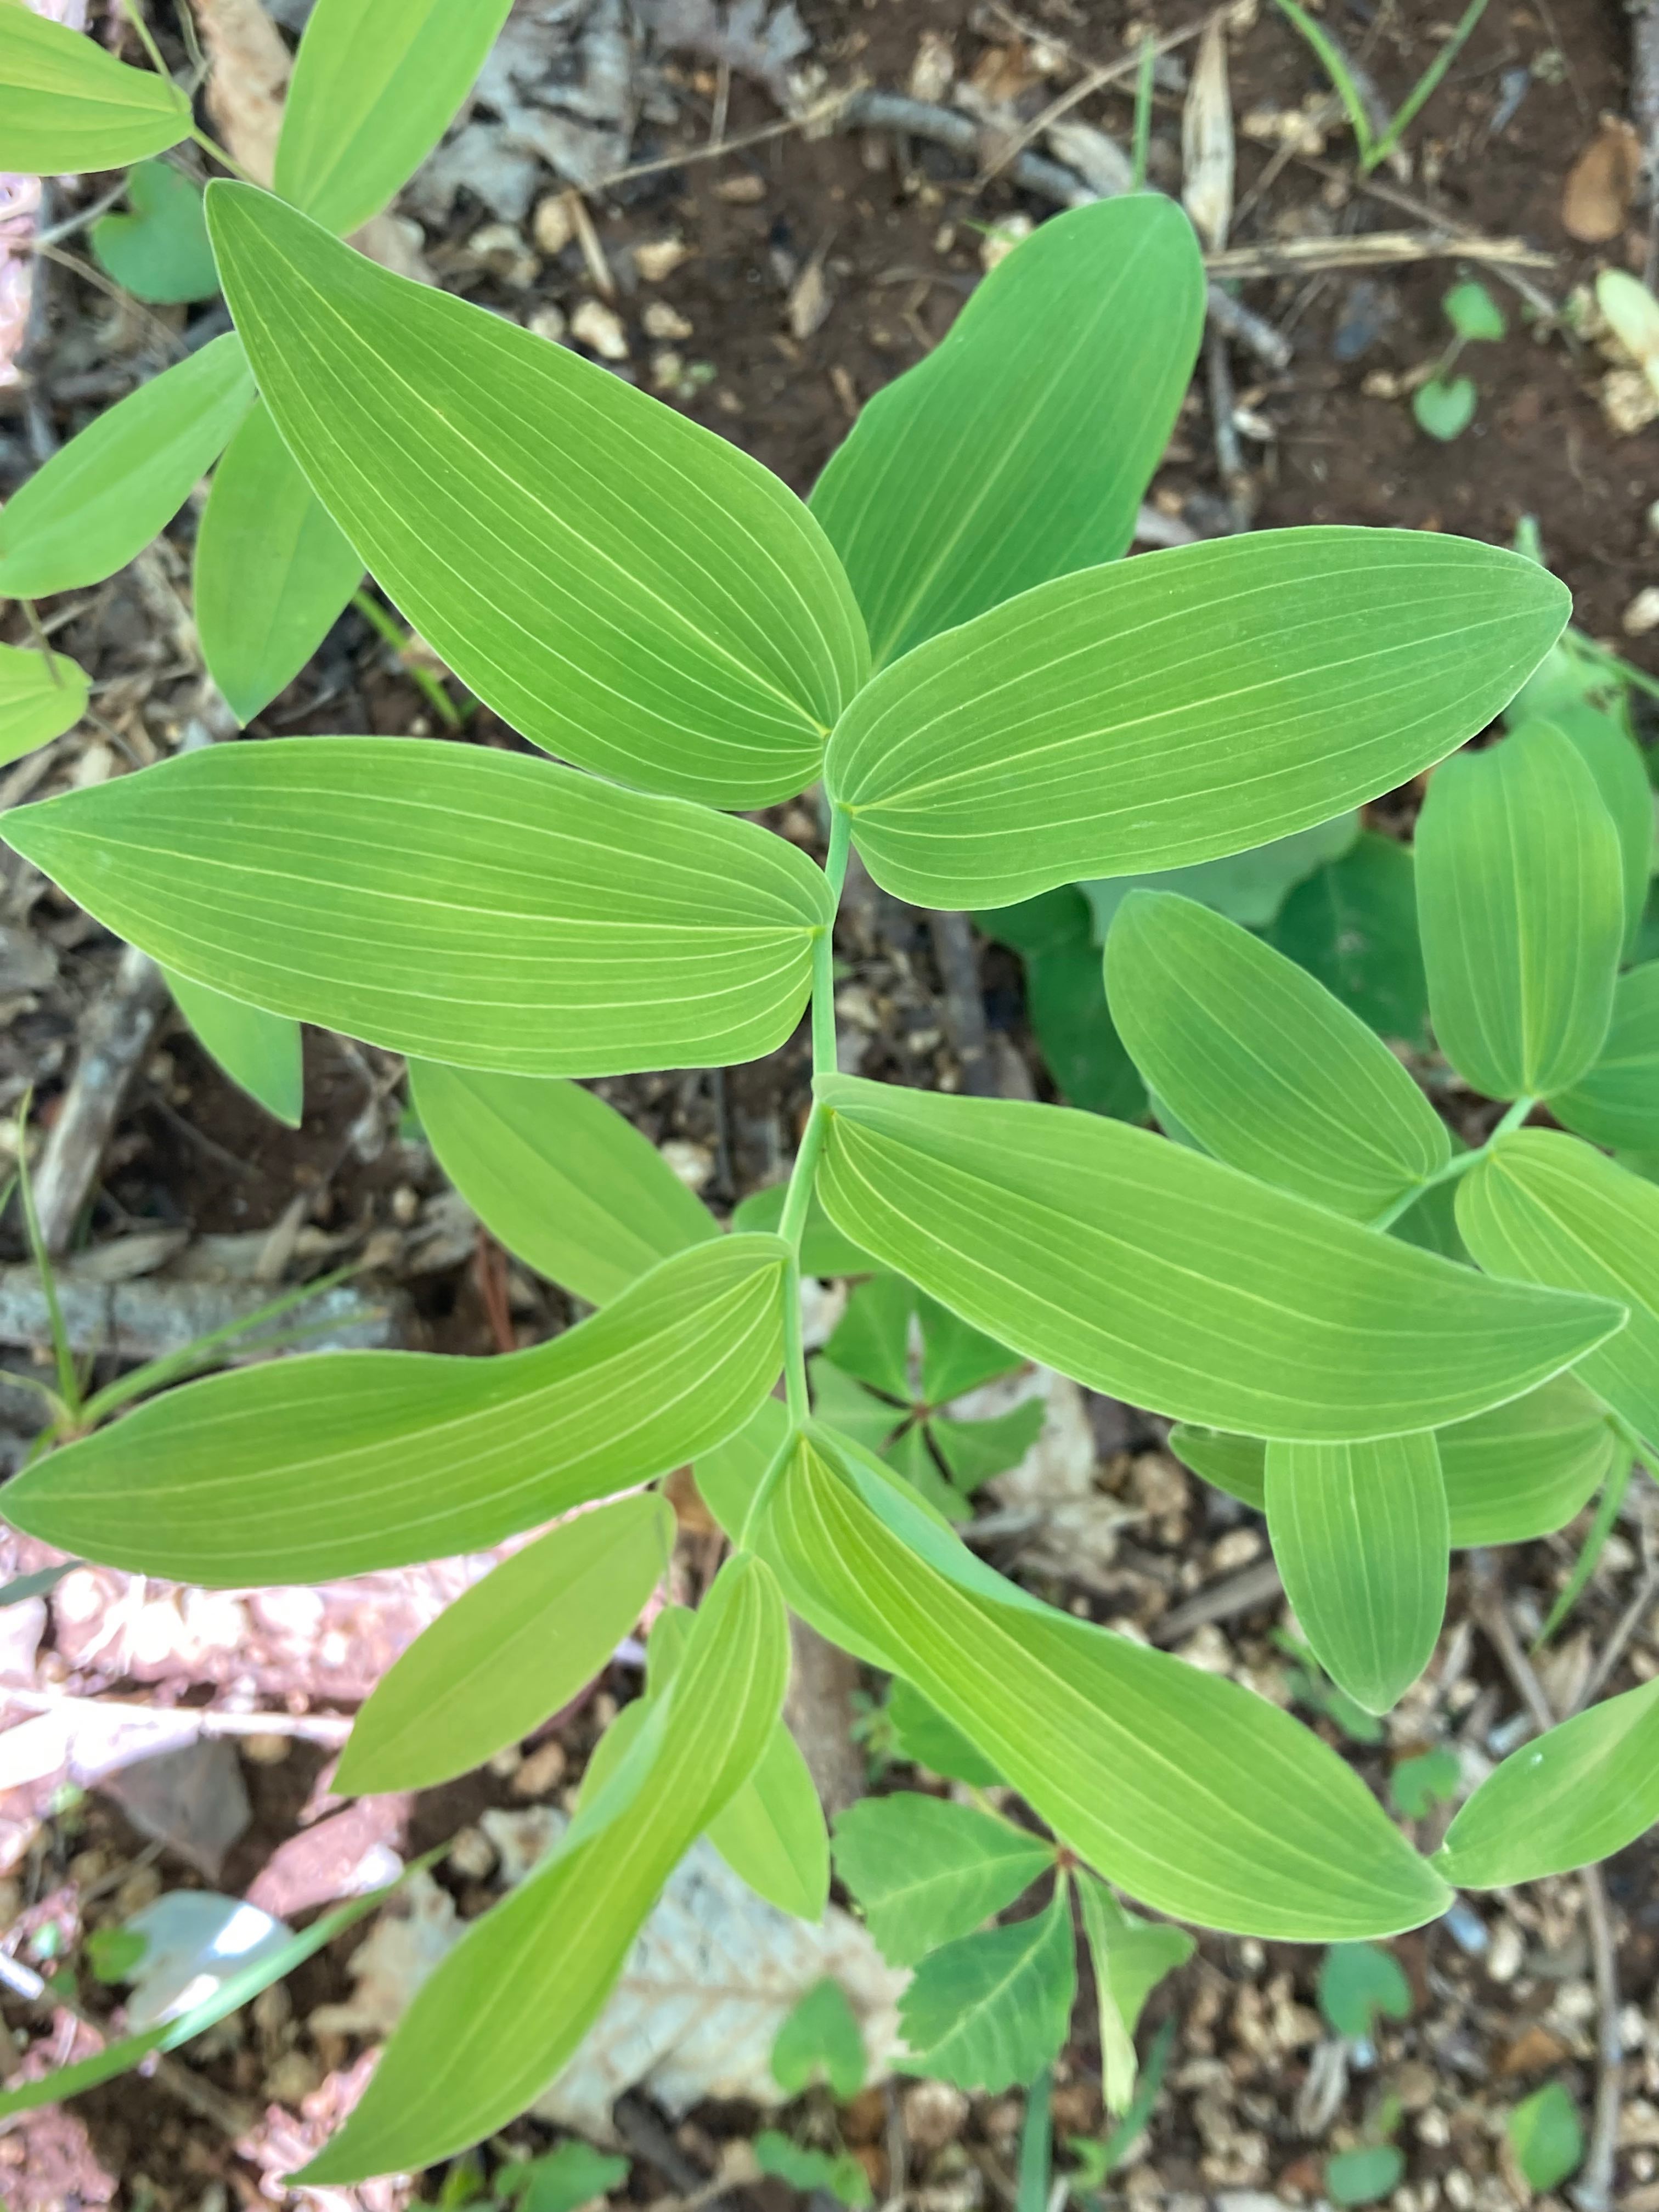 The Scientific Name is Maianthemum racemosum [= Maianthemum racemosum ssp. racemosum, = Smilacina racemosa]. You will likely hear them called Eastern Solomon's-plume, False Solomon's-seal, Feathery False Lily-of-the-valley. This picture shows the Leaves are conspicuously veined and the stem has a slight zigzag. of Maianthemum racemosum [= Maianthemum racemosum ssp. racemosum, = Smilacina racemosa]